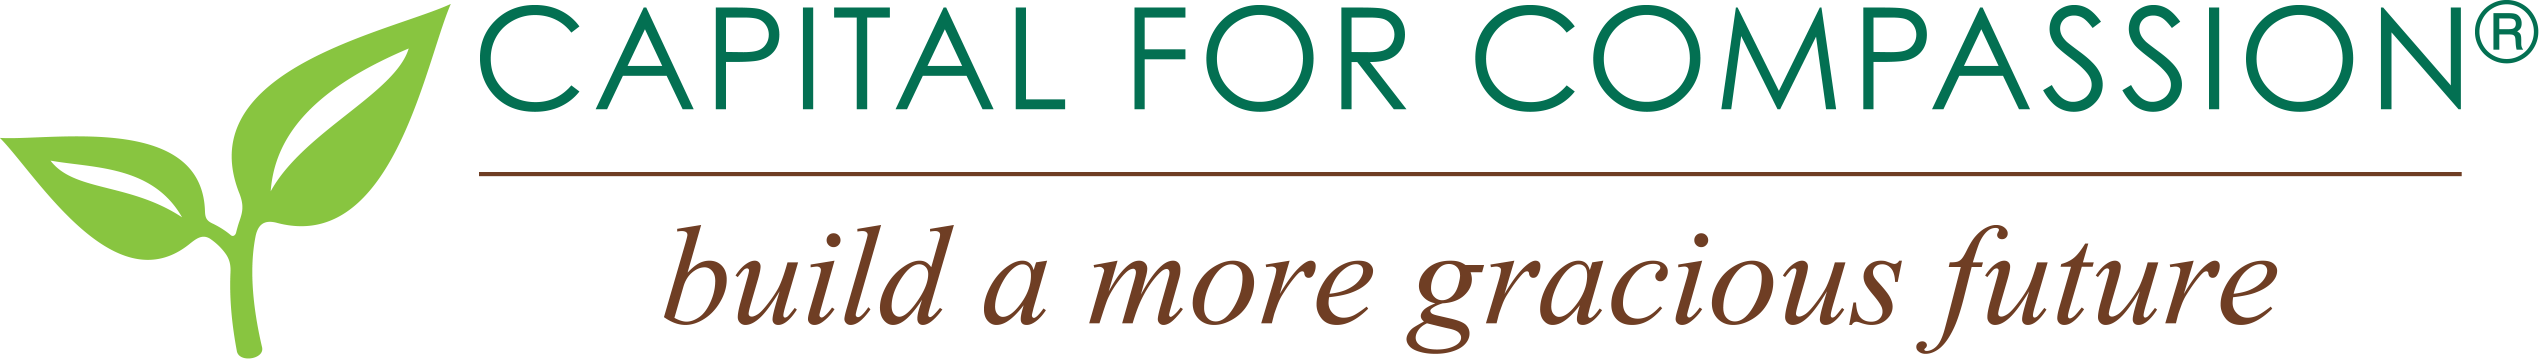 Capitol for Compassion logo